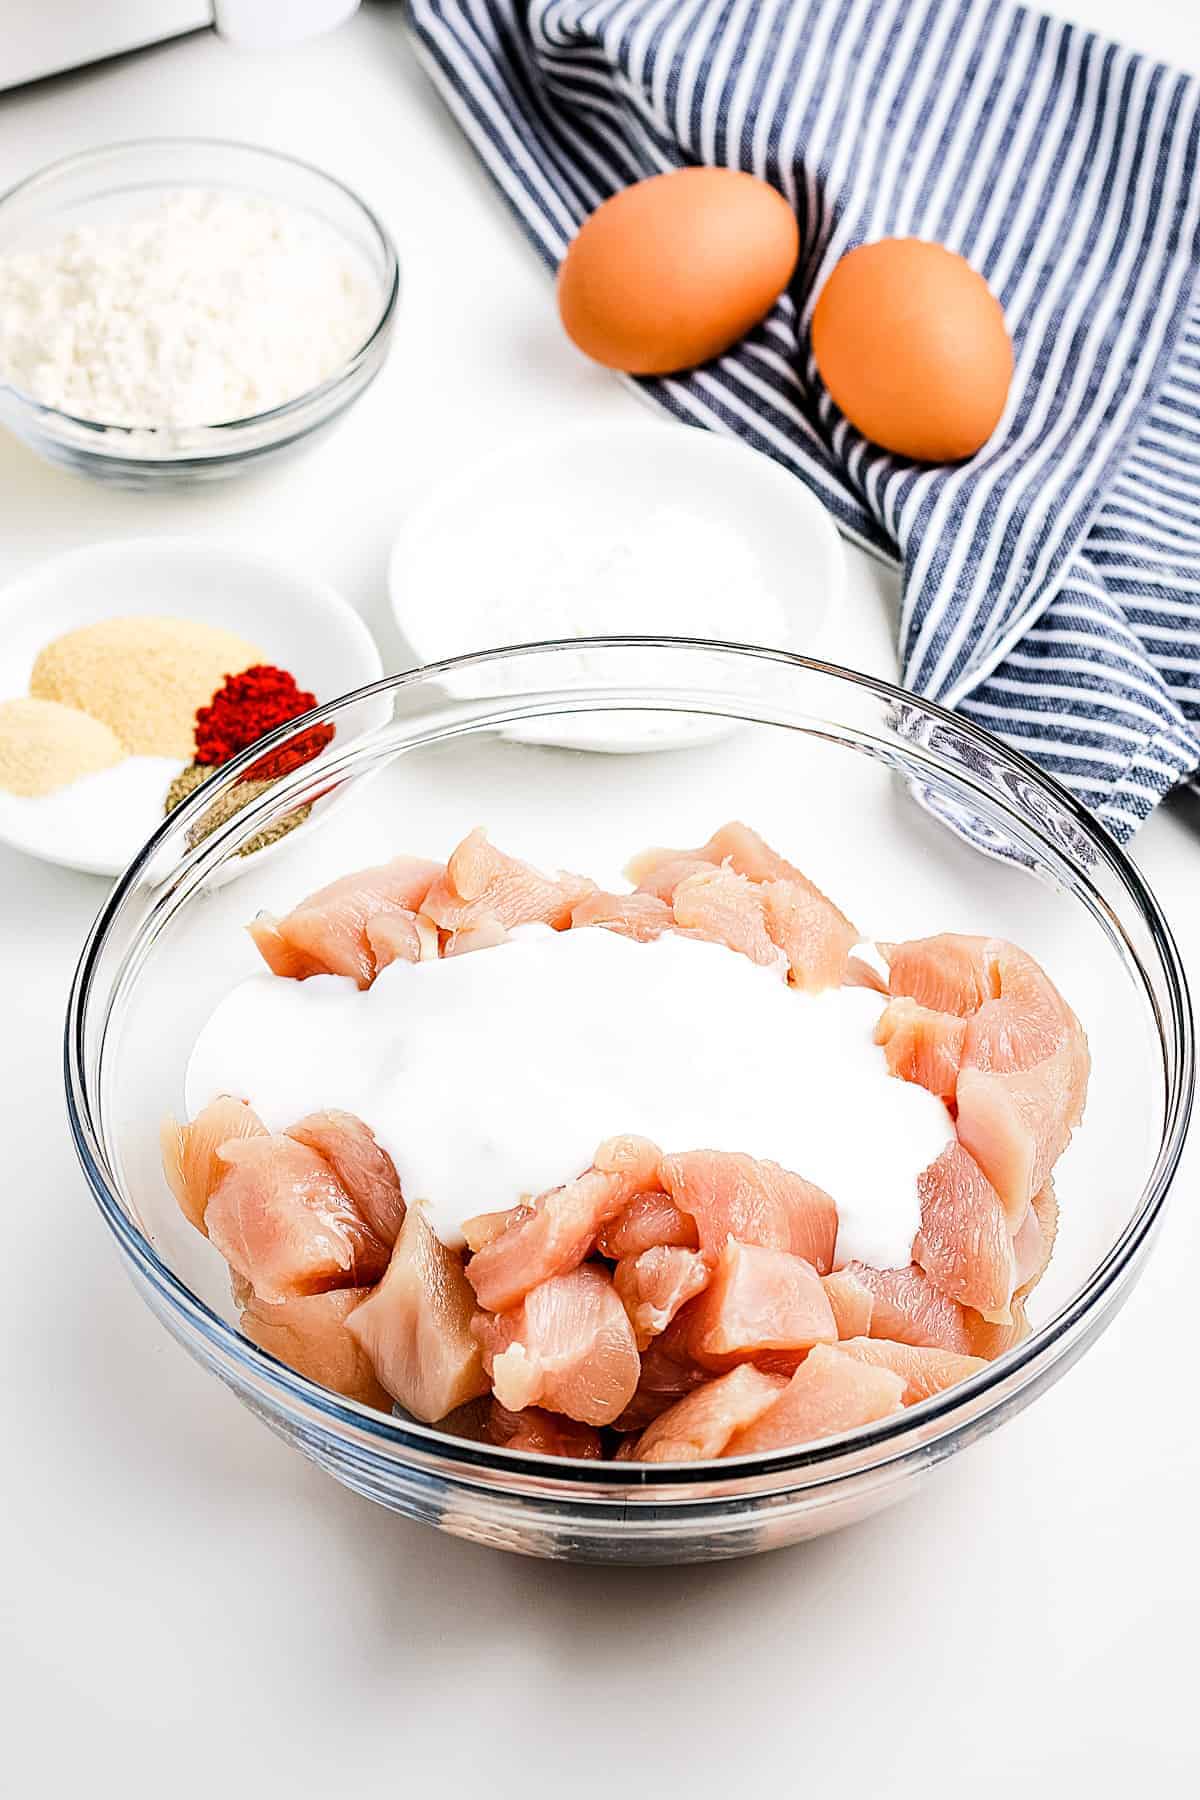 Chicken pieces in a bowl with buttermilk